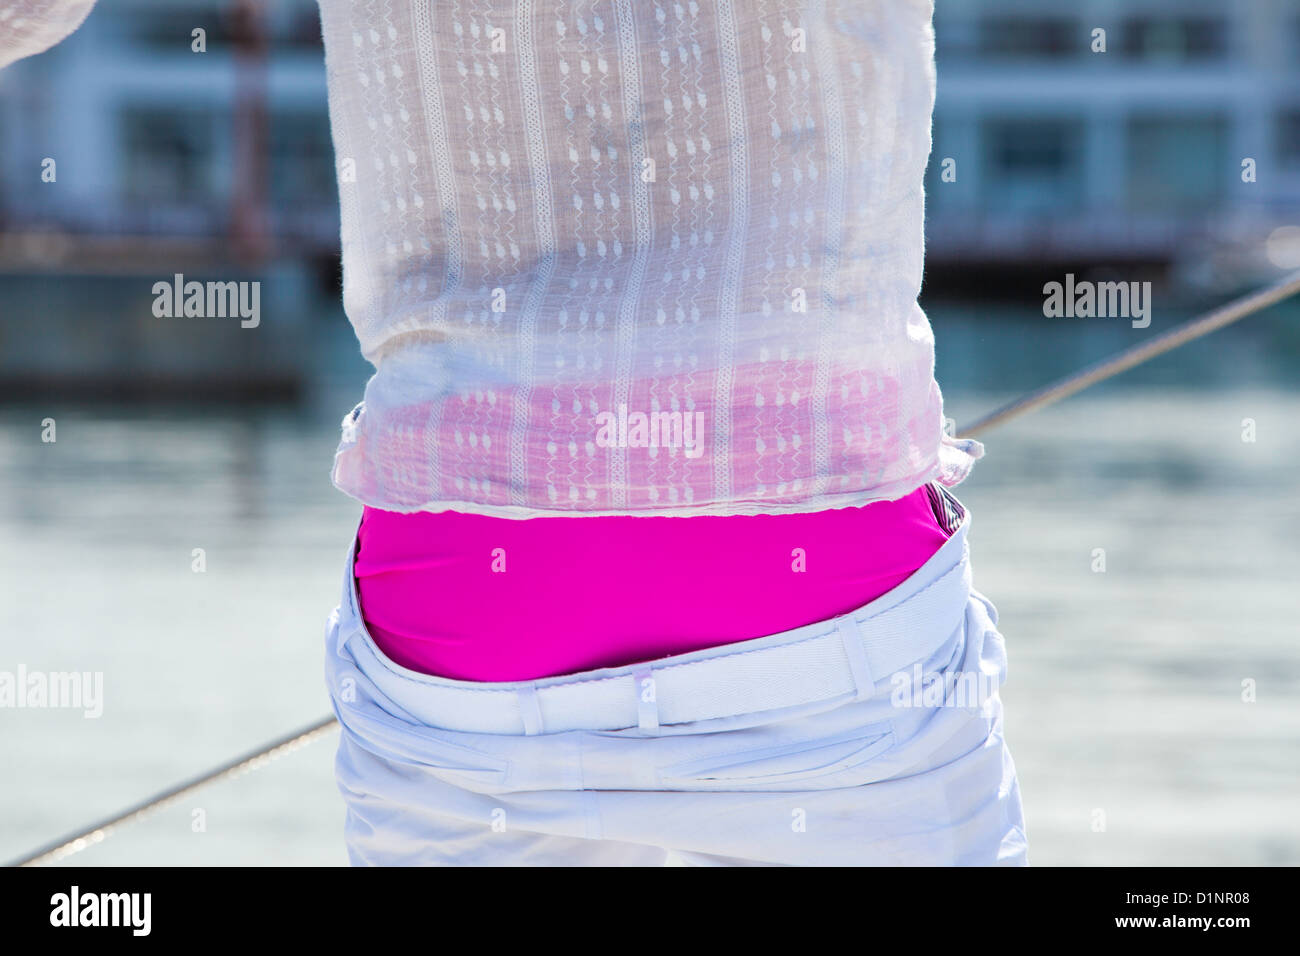 Man shows off fit body and luminous pink shorts Stock Photo